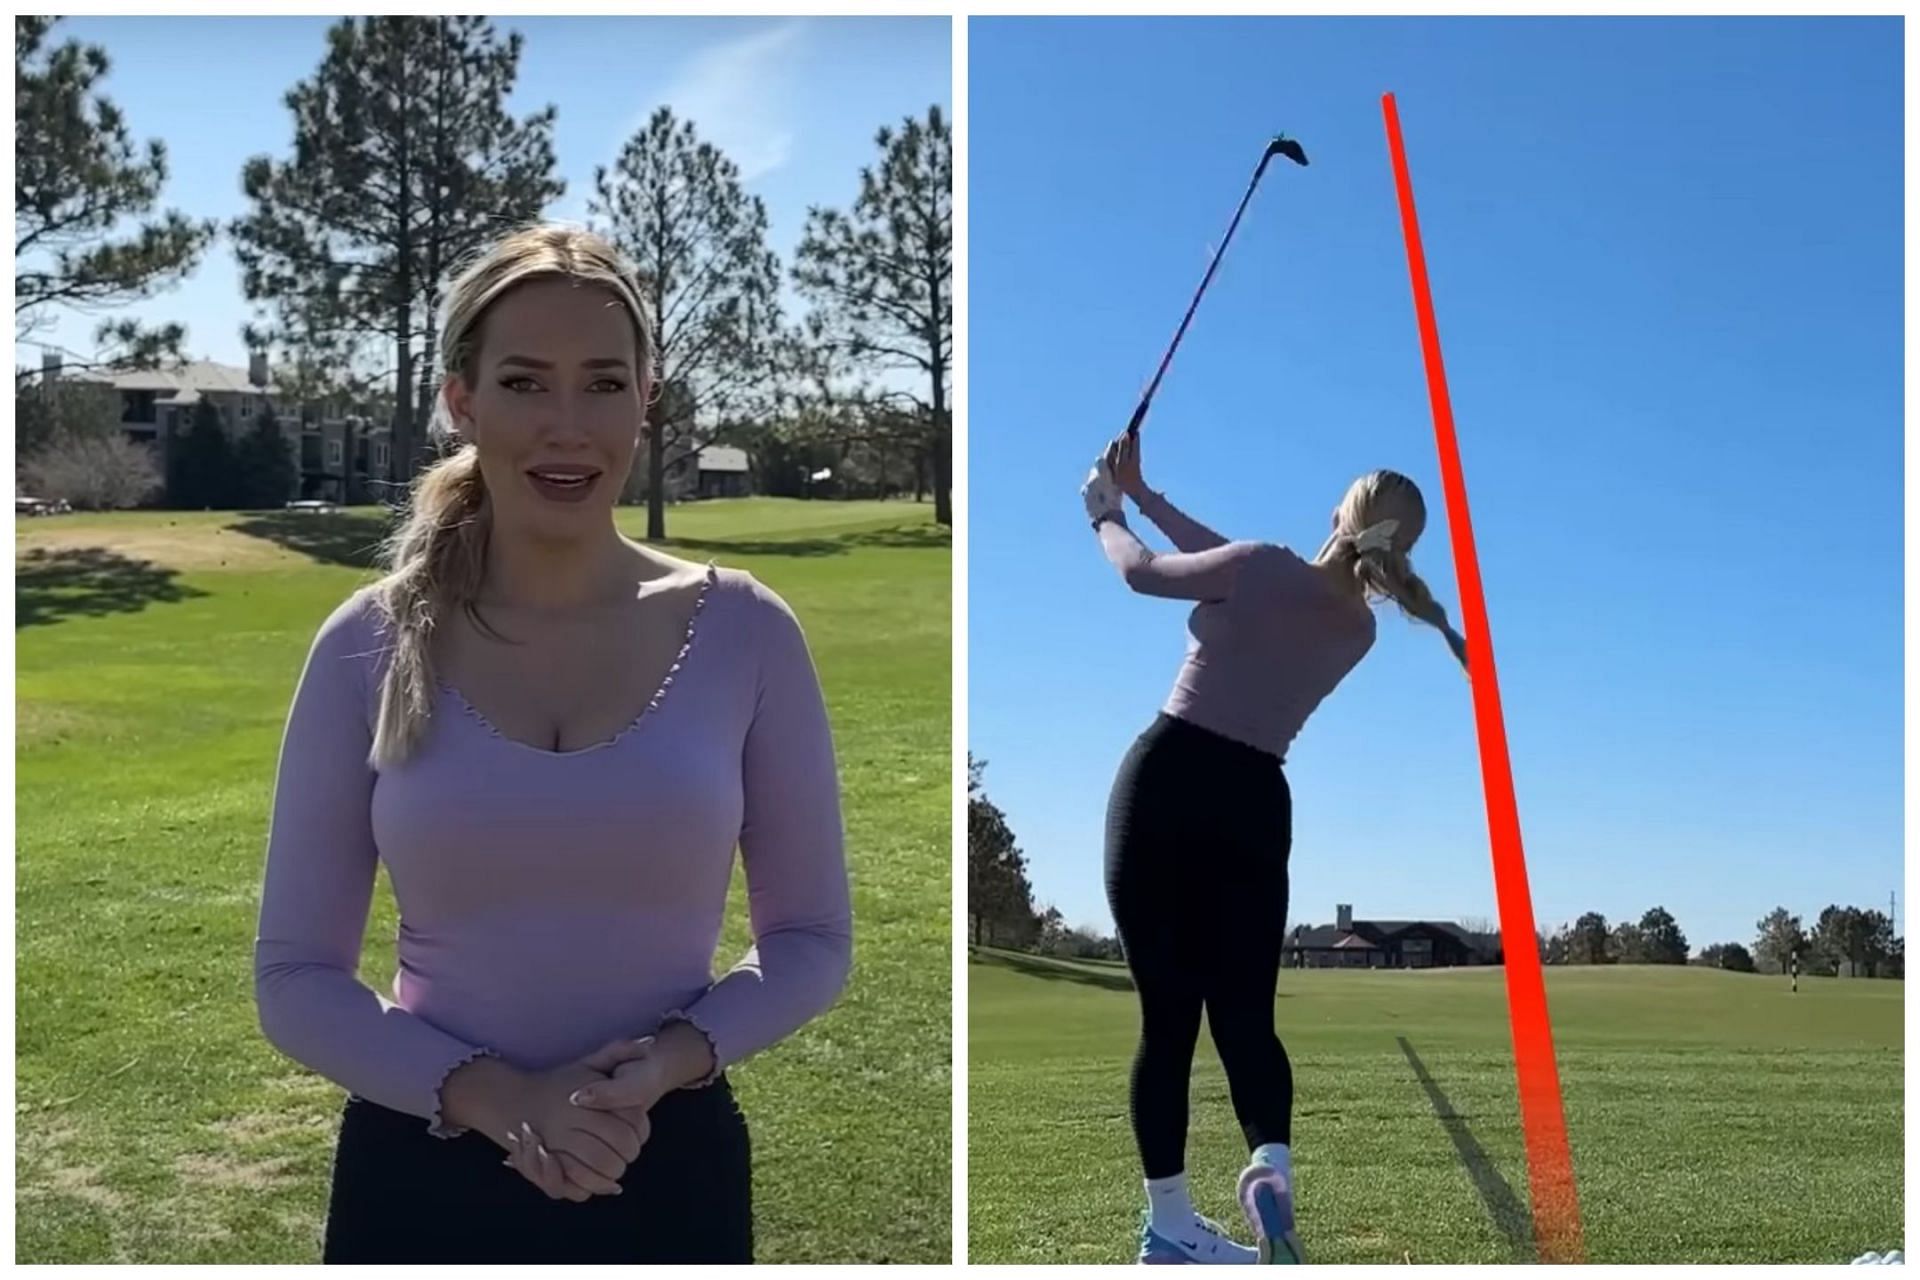 “I’ve been lifting, I feel strong” – Paige Spiranac reveals her updated ...